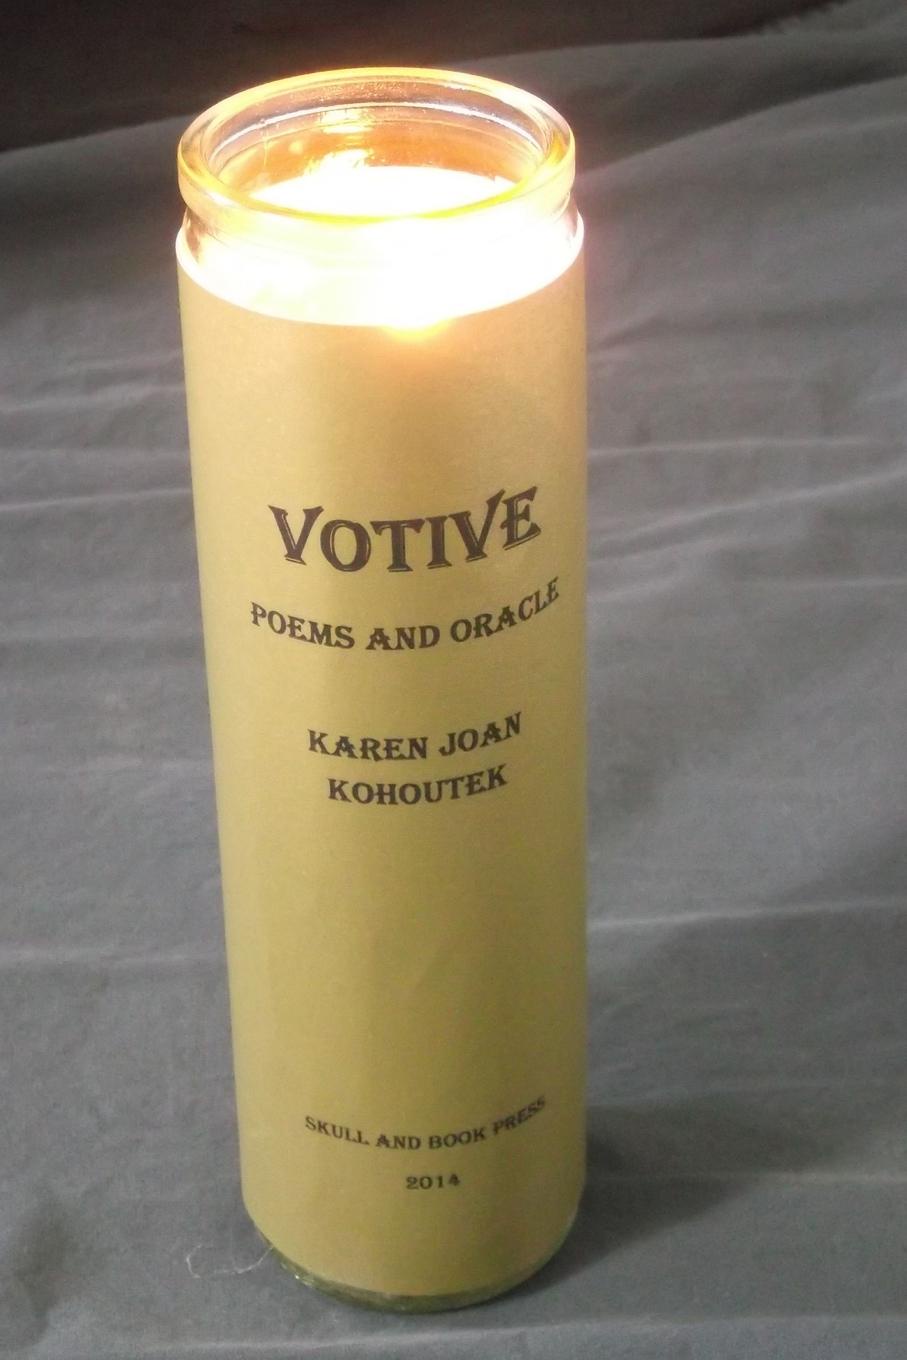 Votive. Poems and Oracle